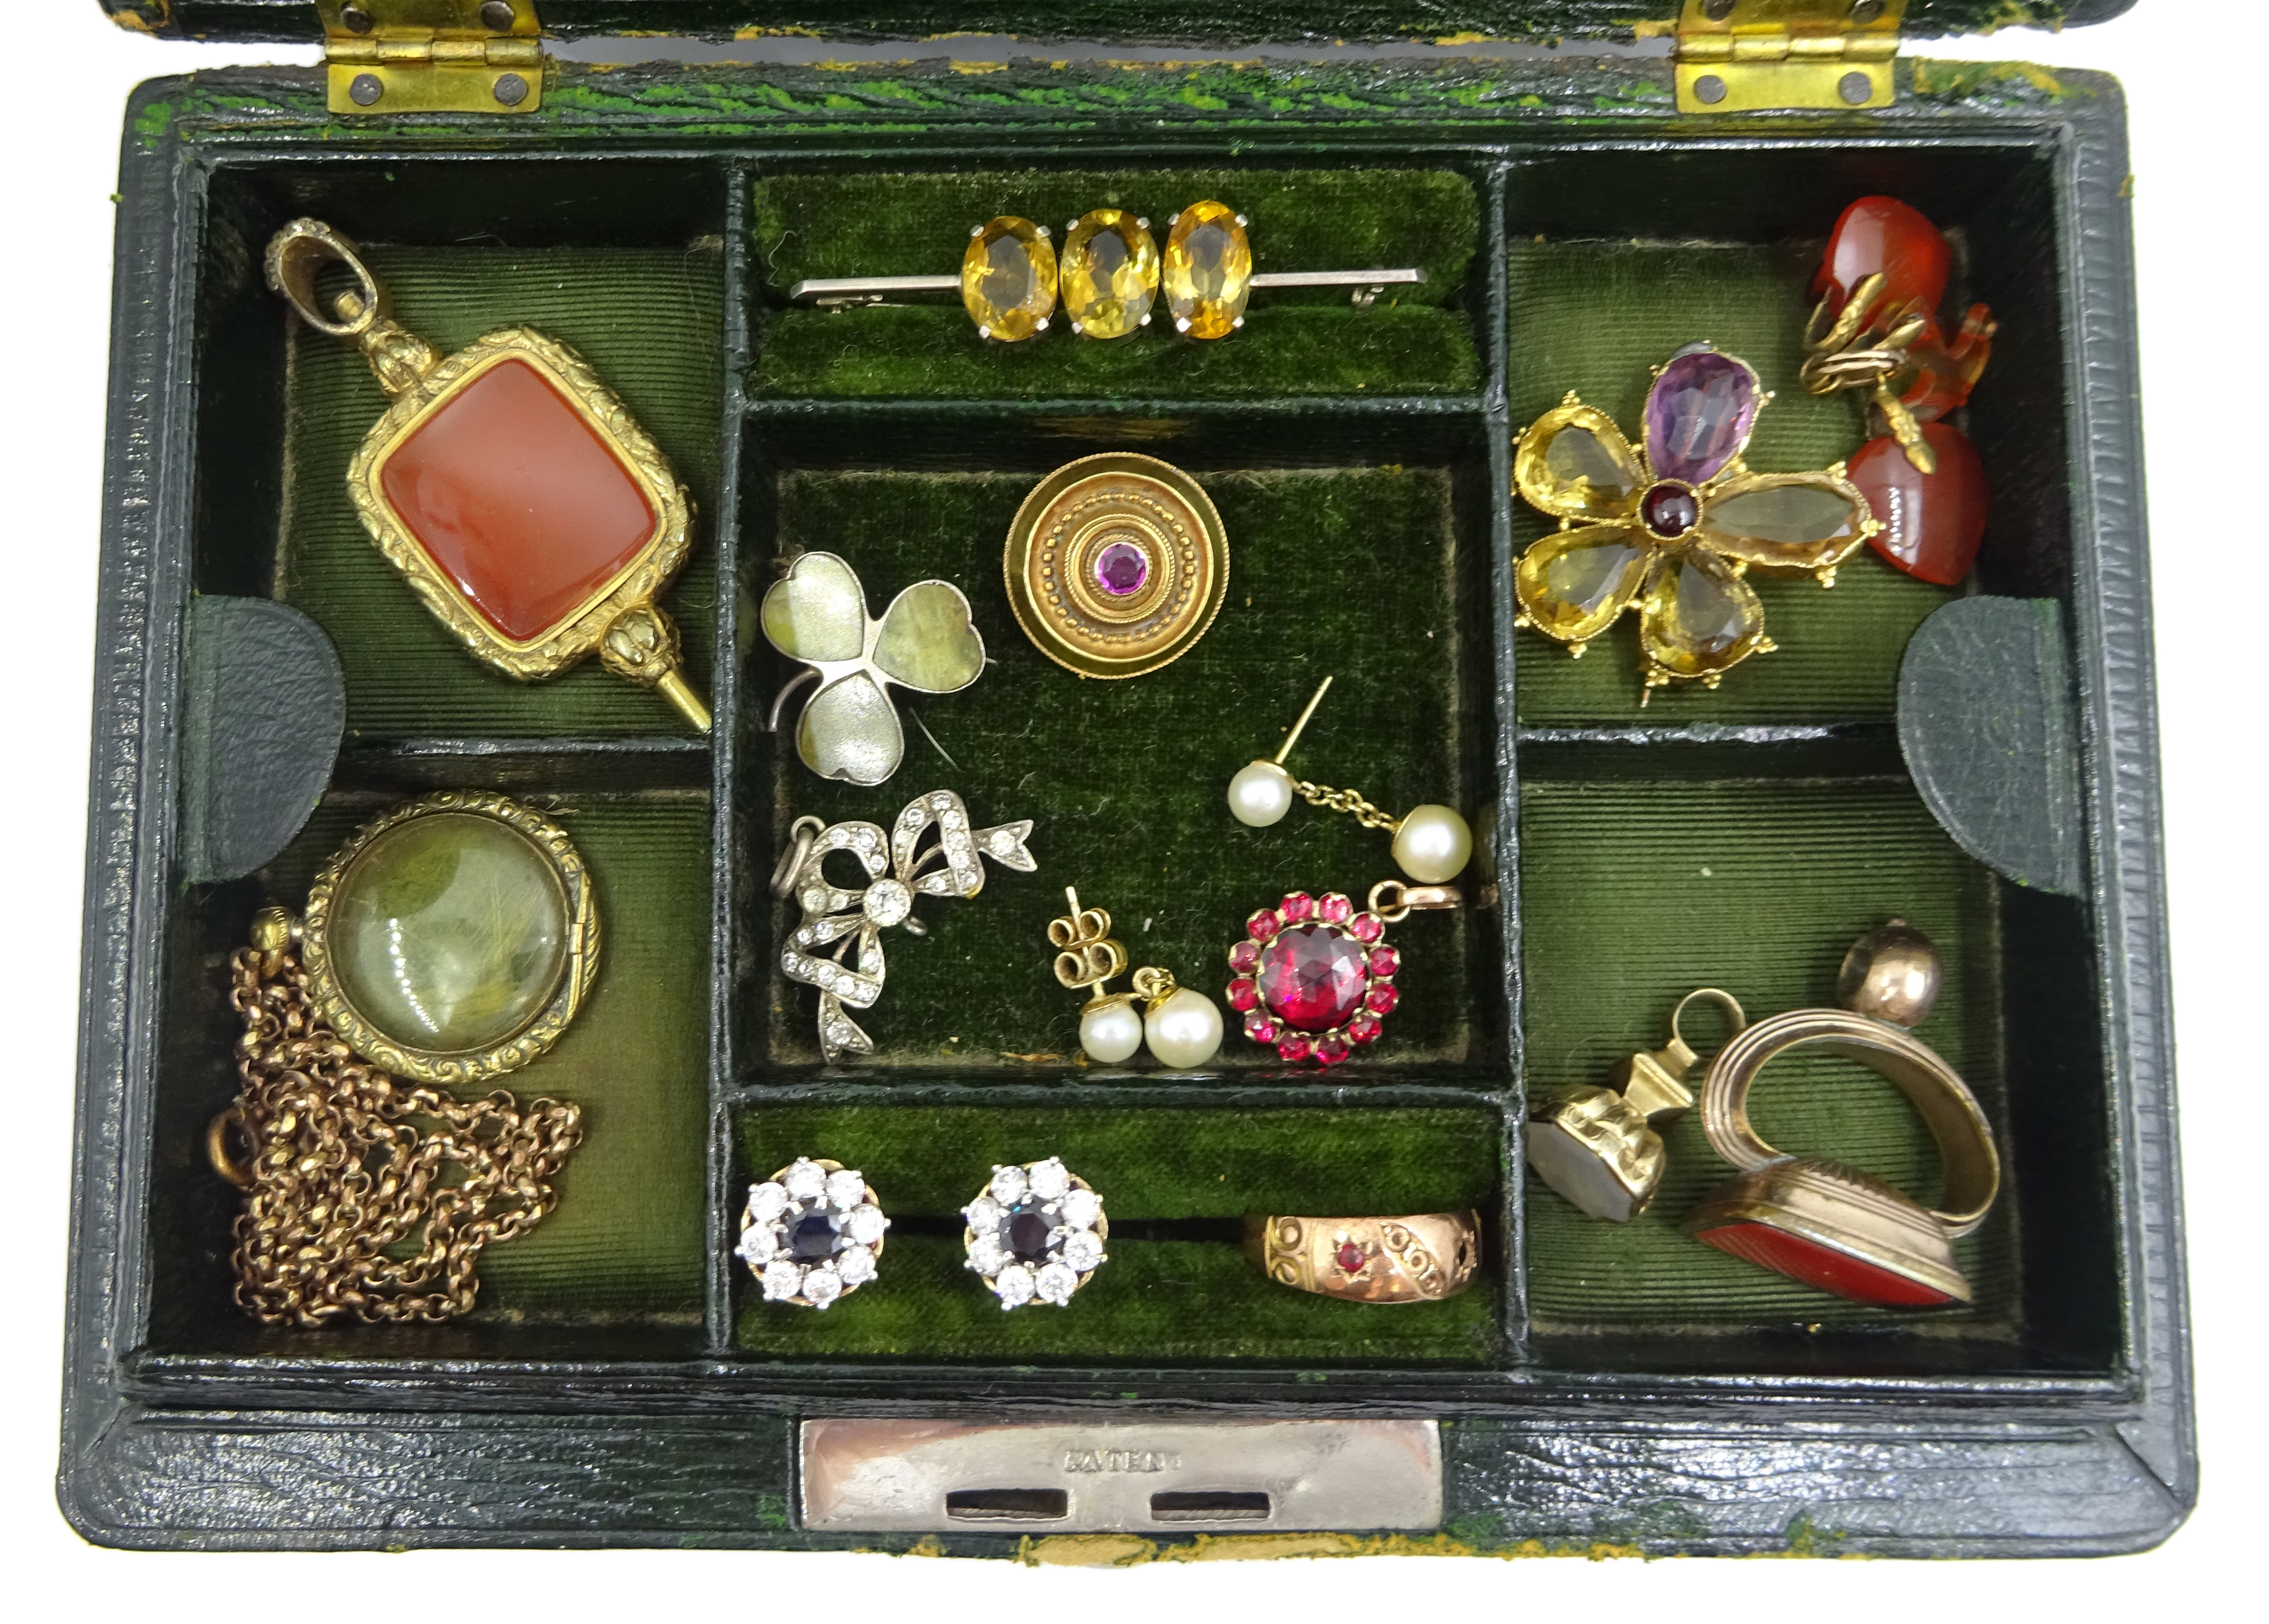 Early 20th century jewellery box, containing Victorian and later jewellery including 17ct gold stone - Image 7 of 8